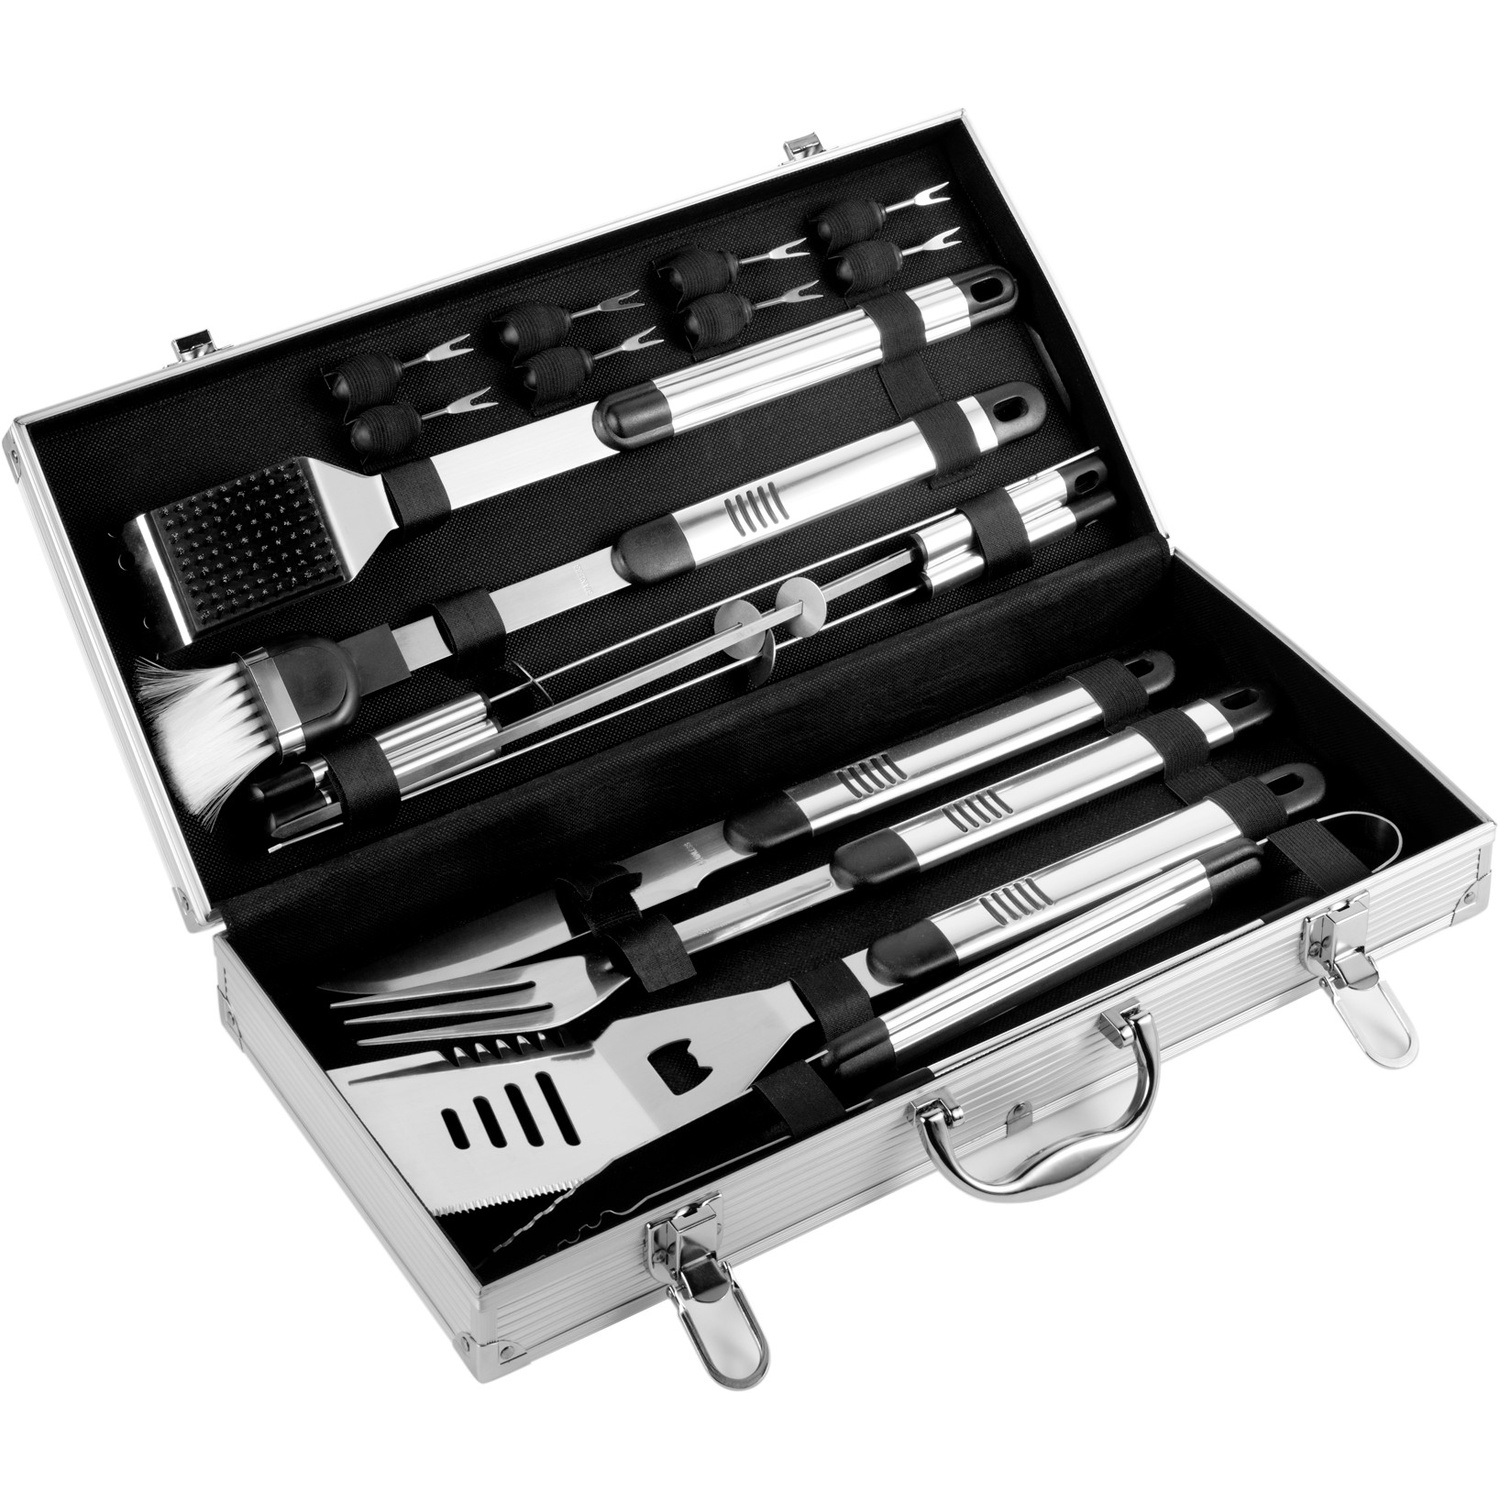 002617 032999999 3d135 gbo pro01 fal - Barbecue set